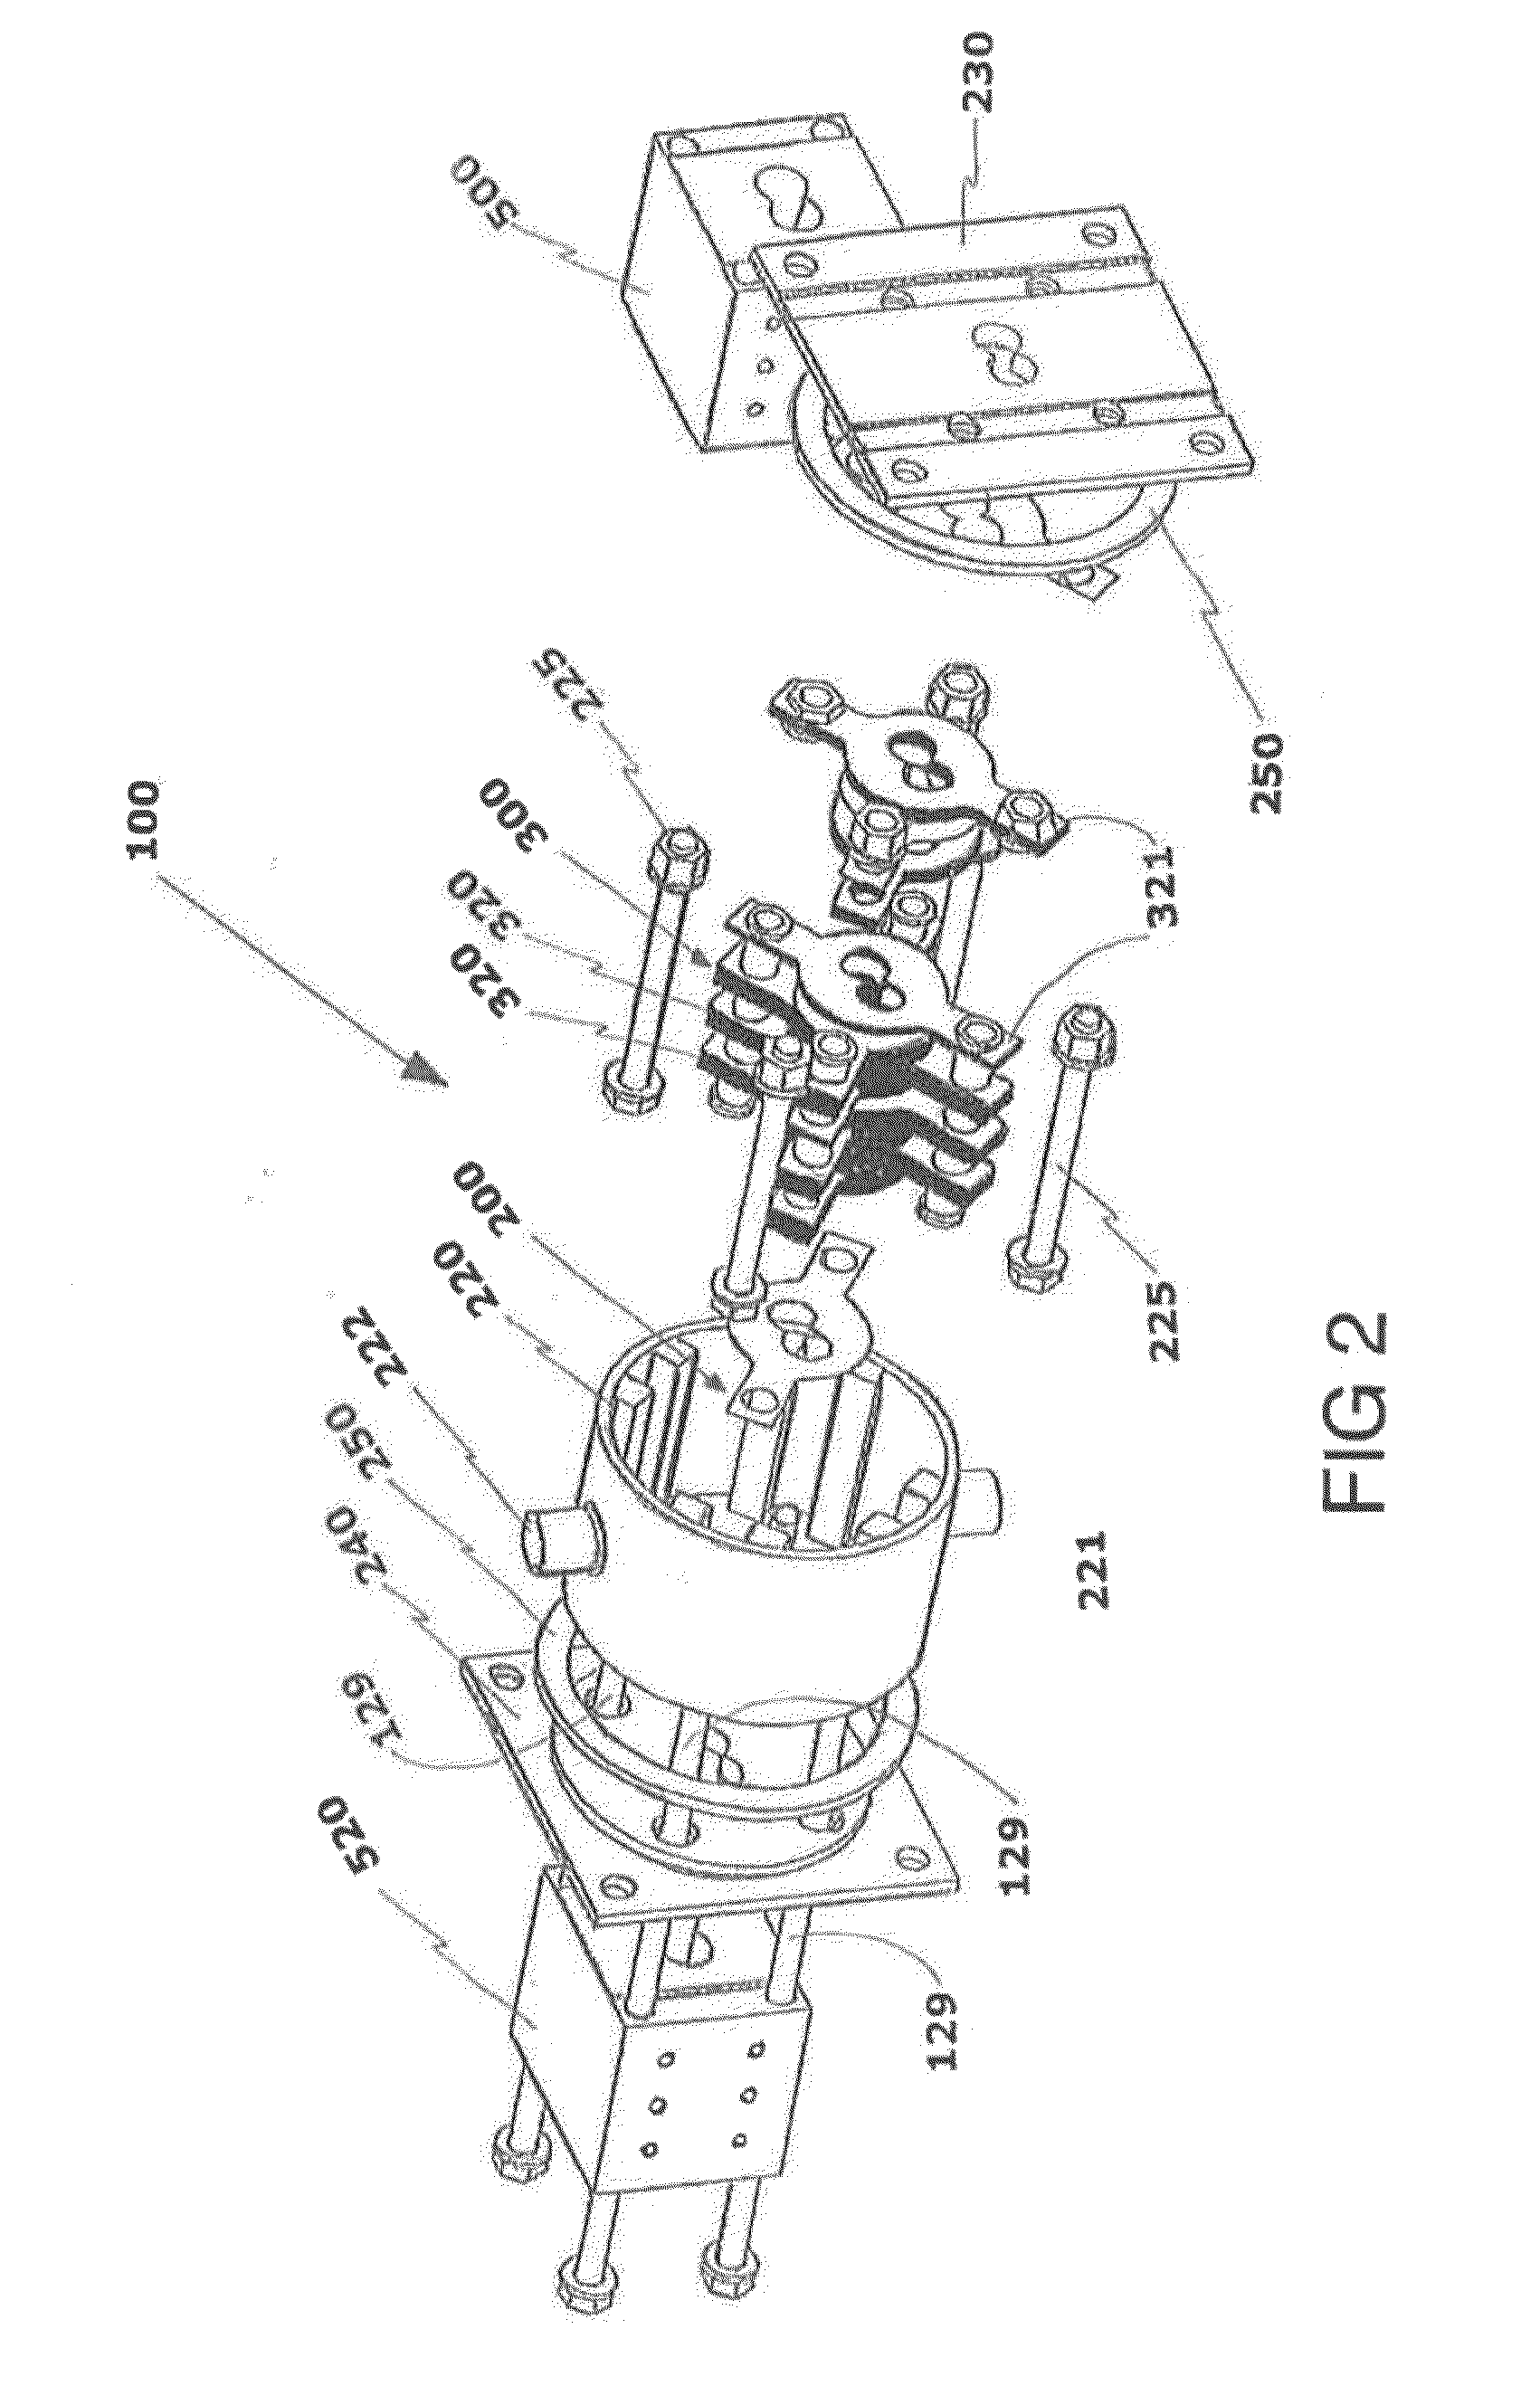 Solid/fluid separation device and method for treating biomass including solid/fluid separation